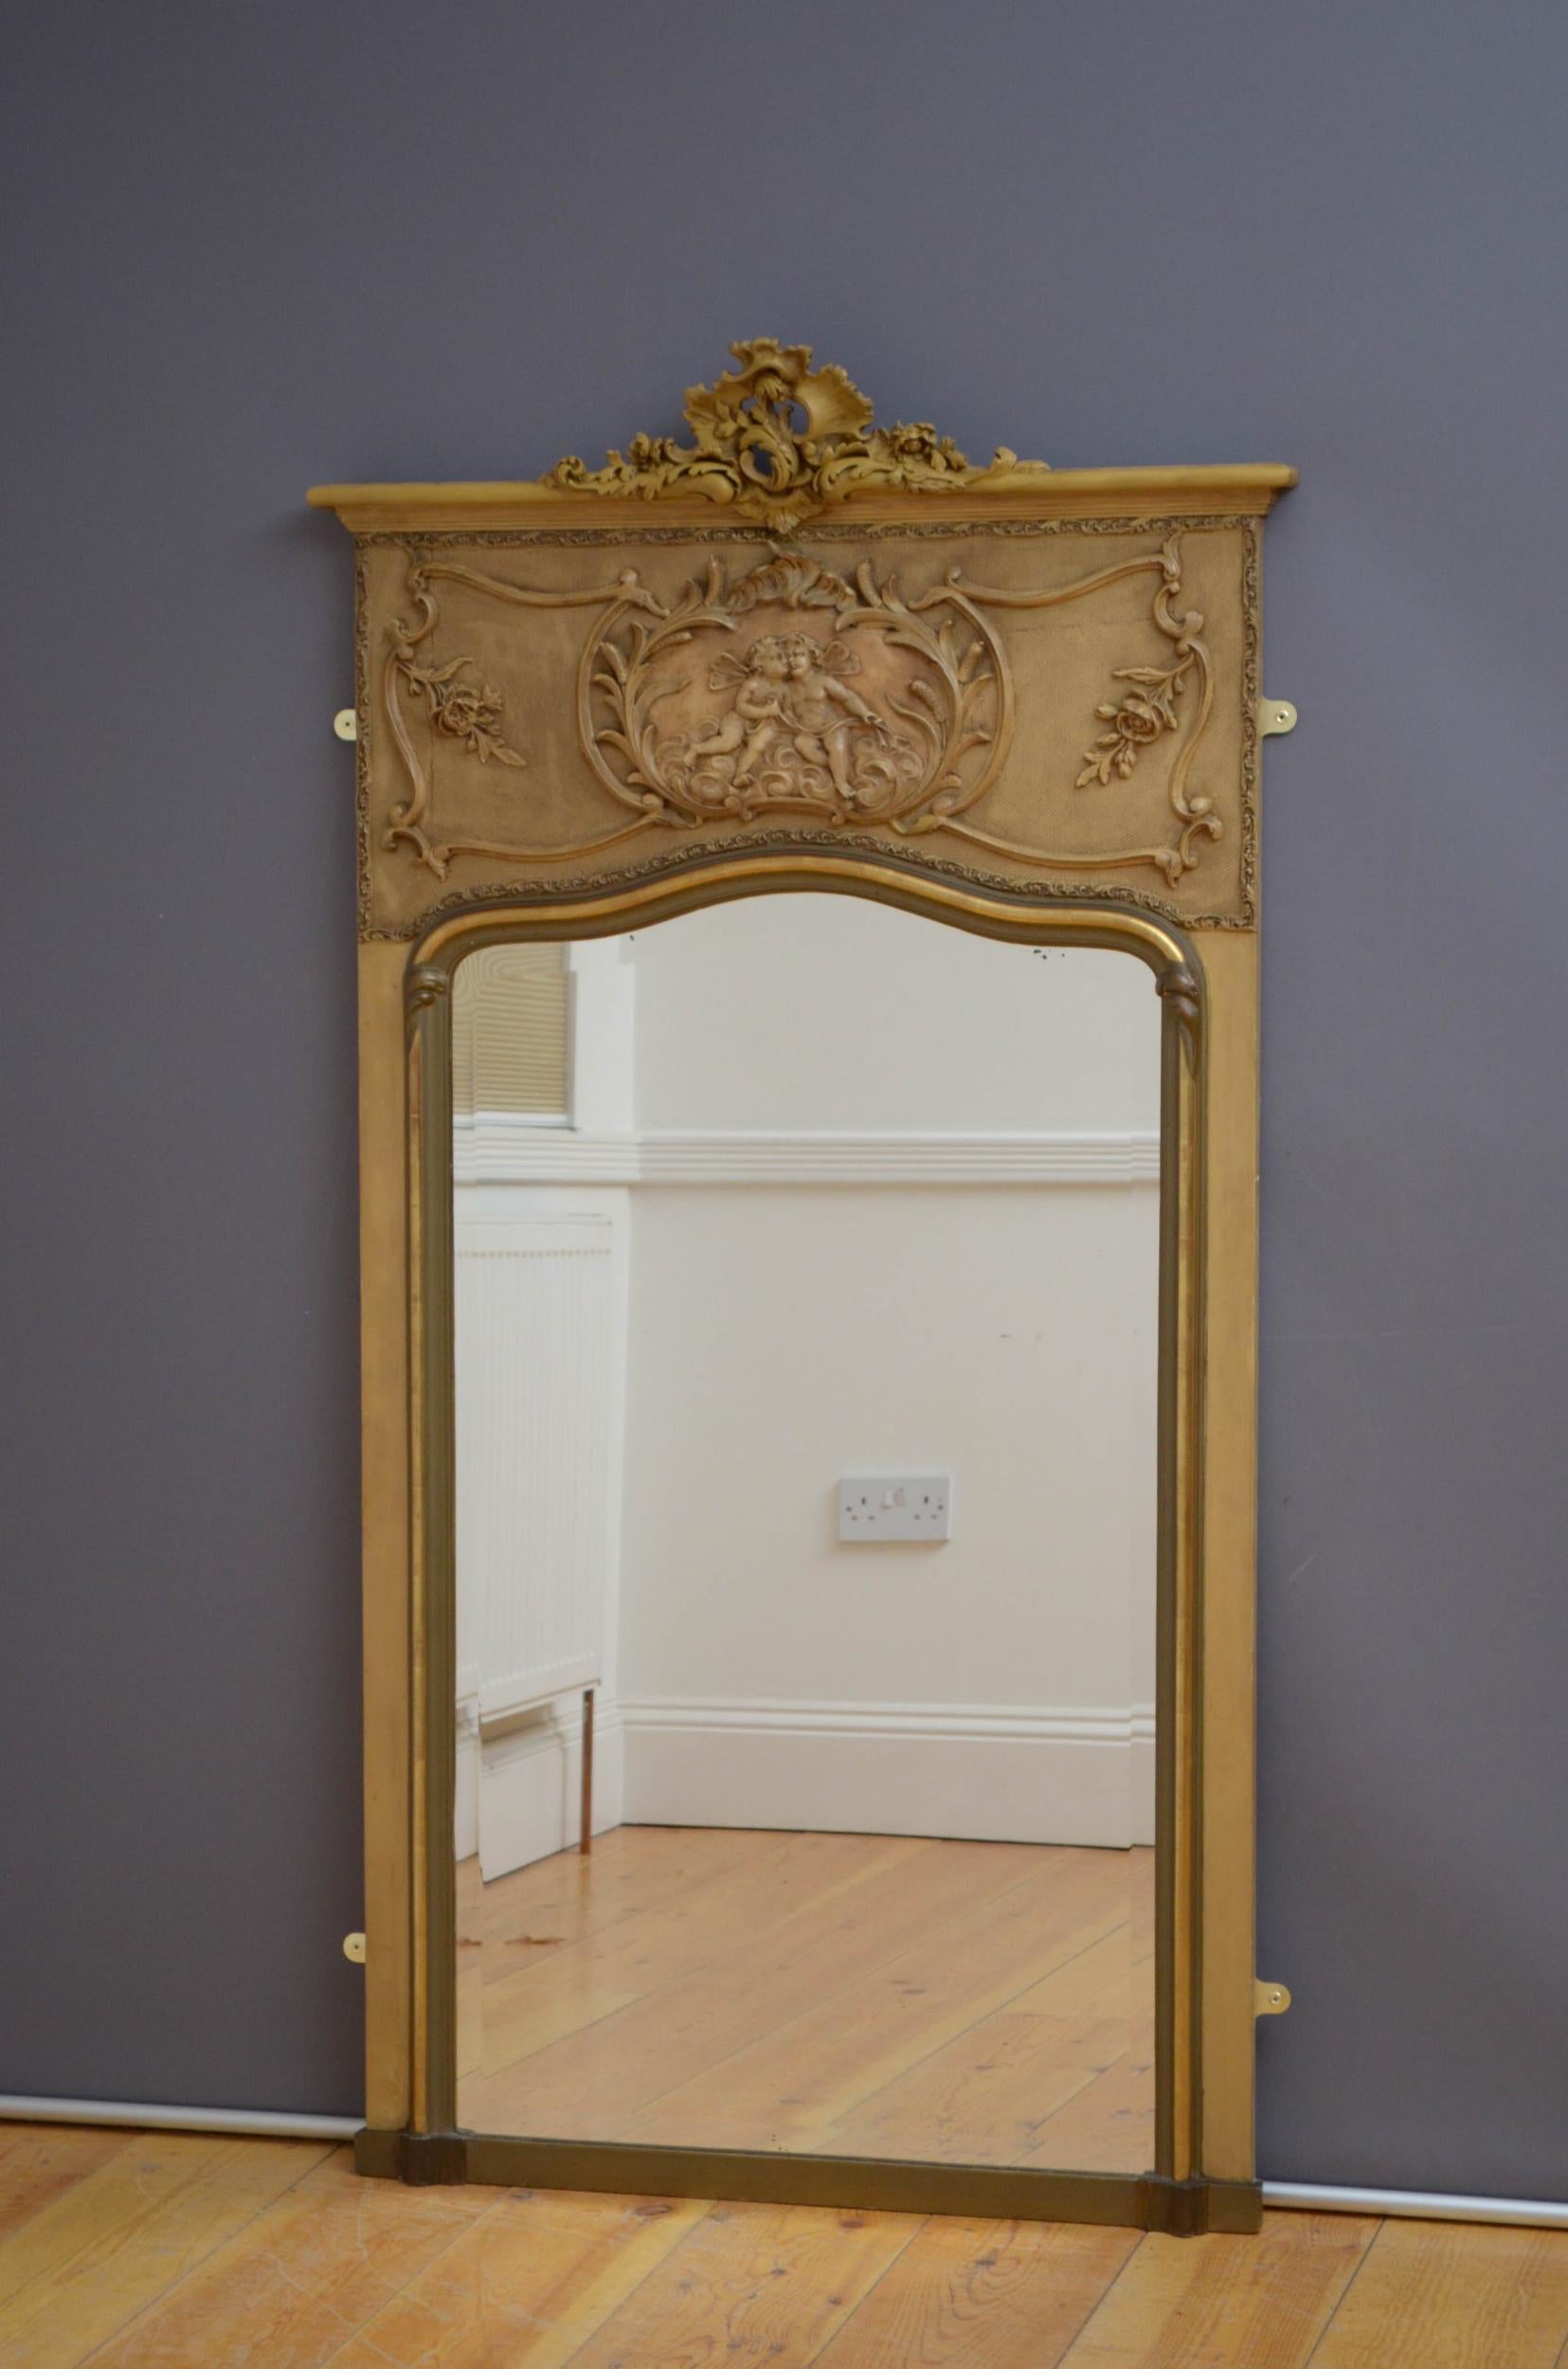 Sn4991 A very attractive 19th century pier mirror, having original bevelled edge mirror with some foxing in gilded and painted frame with centre crest to the top, all in wonderful home ready condition, c1880

Measures: H 62